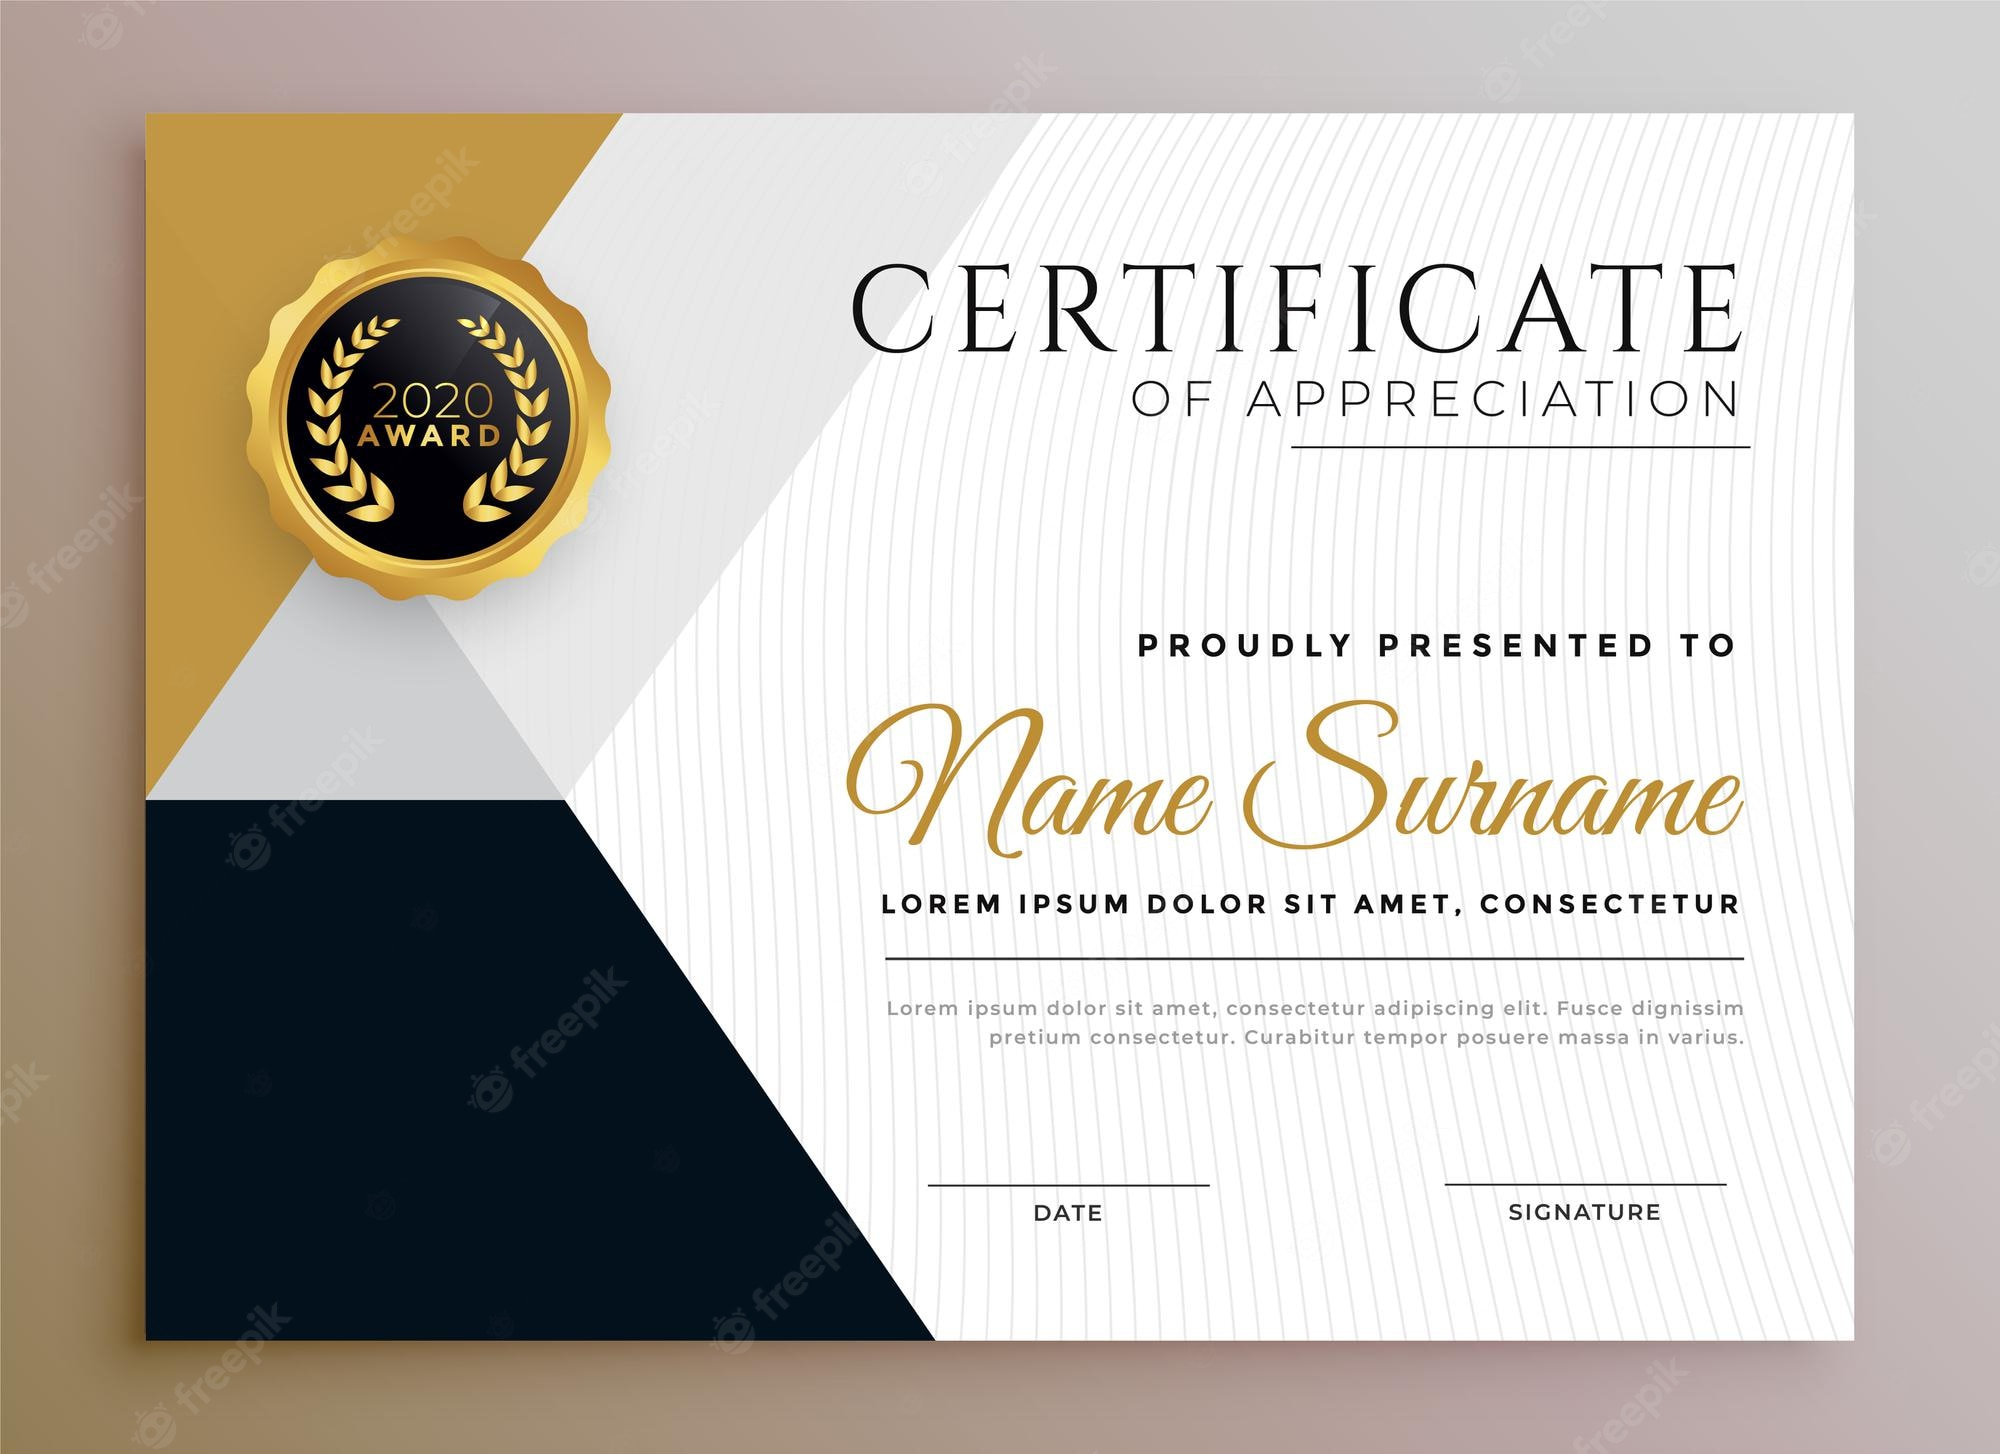 Certificate Images - Free Download on Freepik With Regard To Free Certificate Of Excellence Template